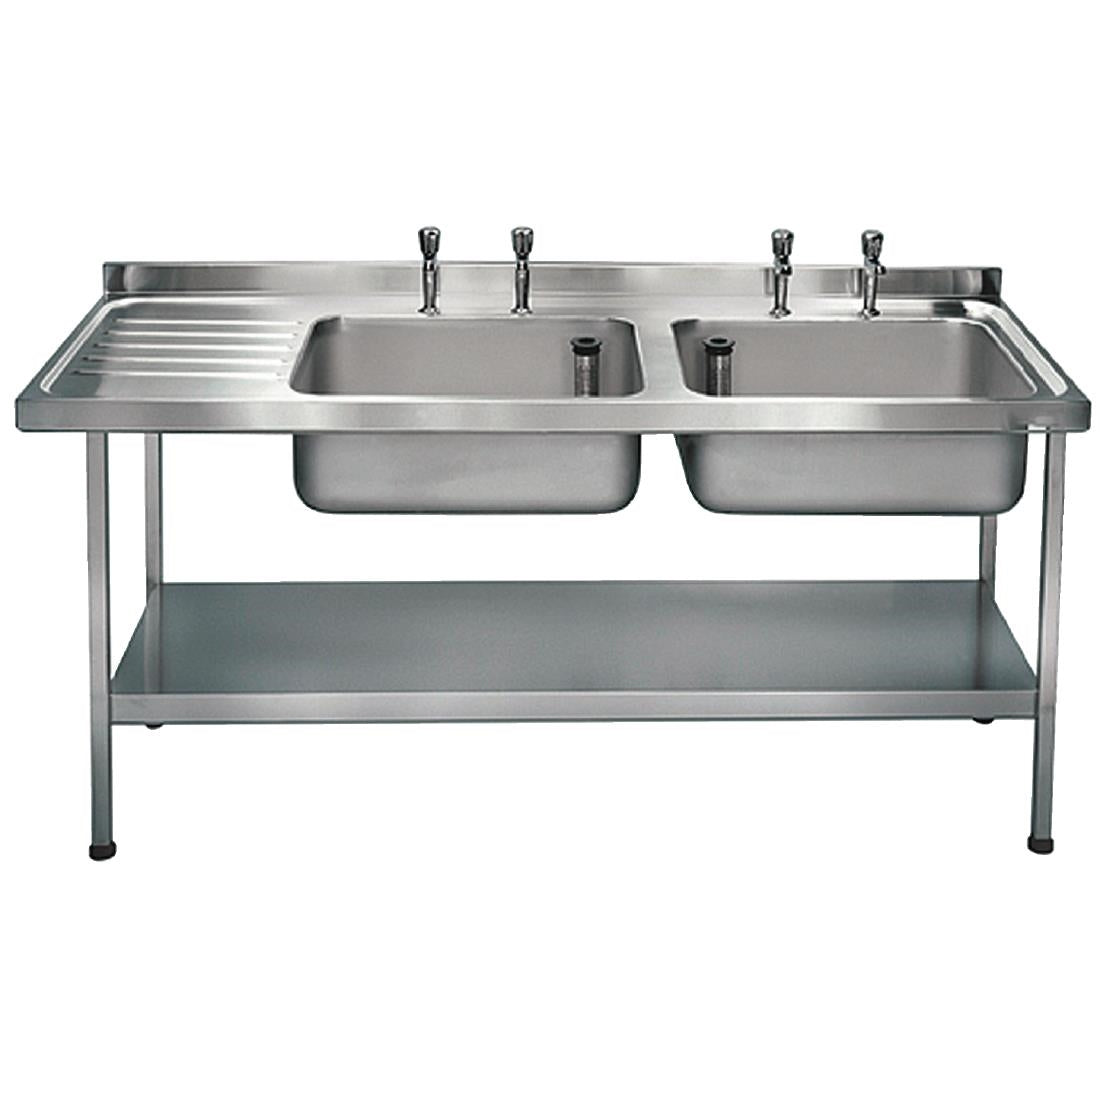 Franke Sissons Self Assembly Stainless Steel Double Sink Left Hand Drainer 1500x600mm JD Catering Equipment Solutions Ltd